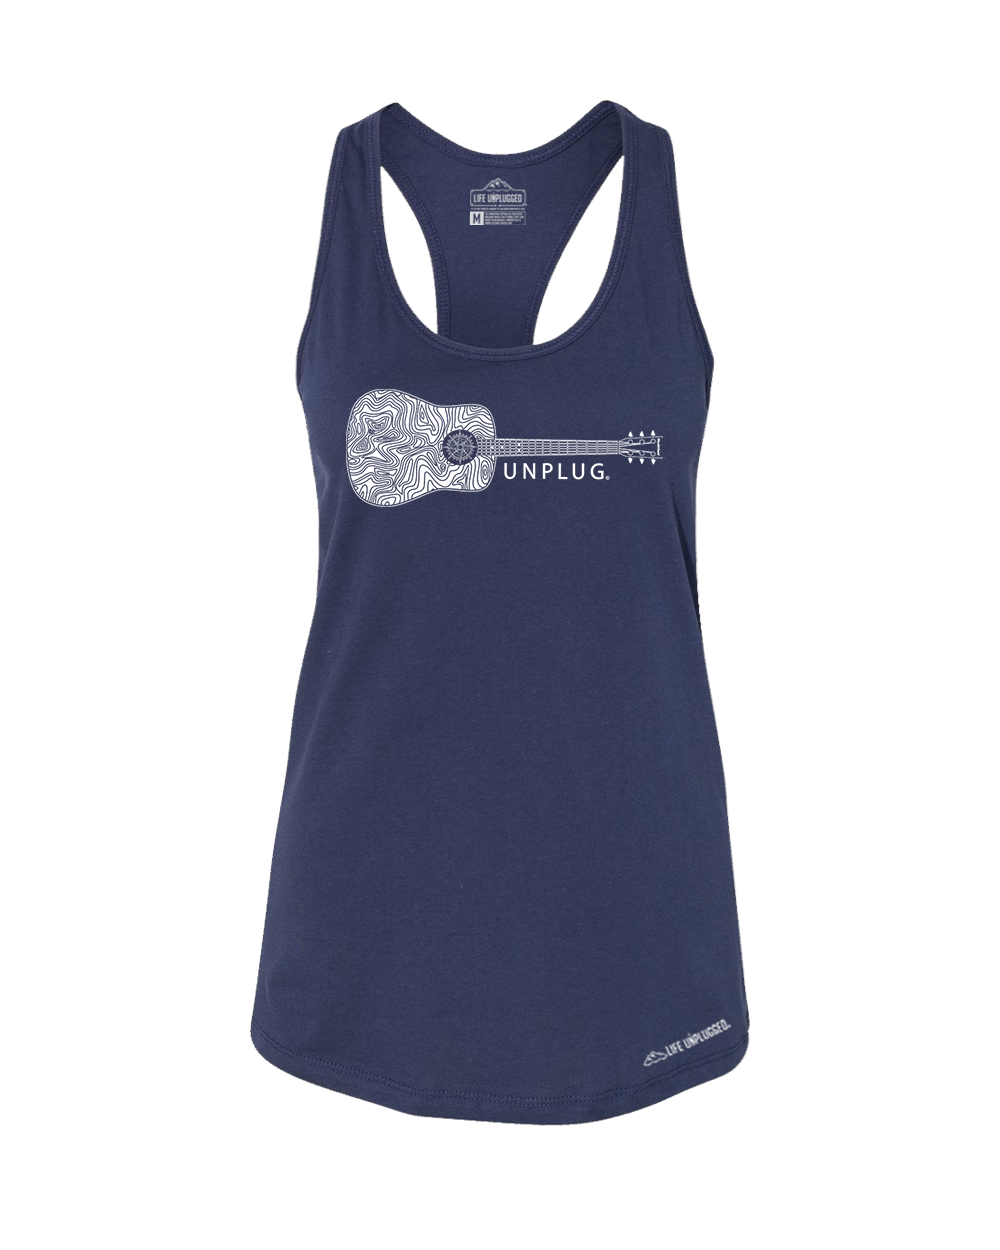 Guitar Premium Women's Relaxed Fit Racerback Tank Top - Life Unplugged